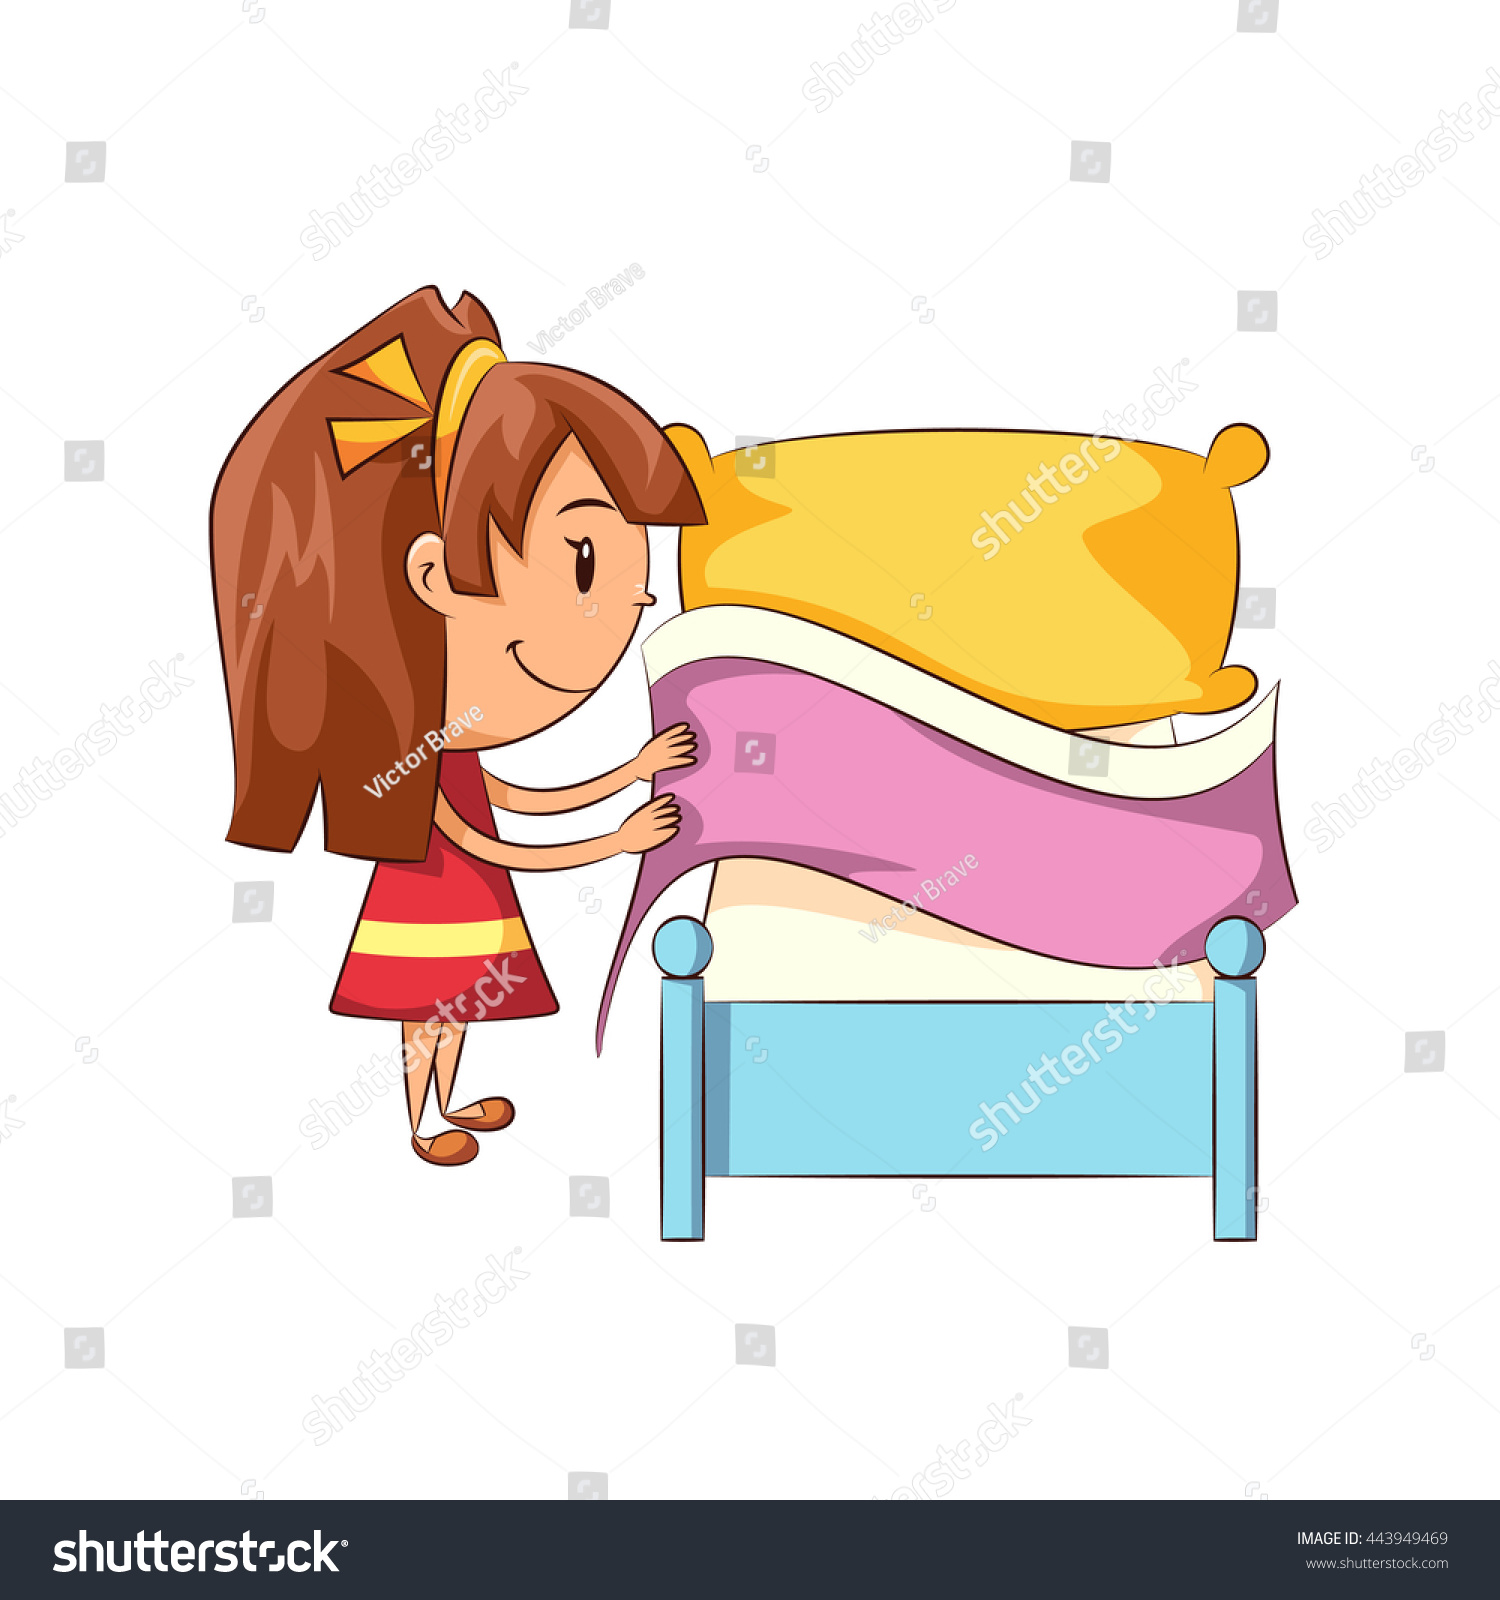 girl making bed clipart - photo #2